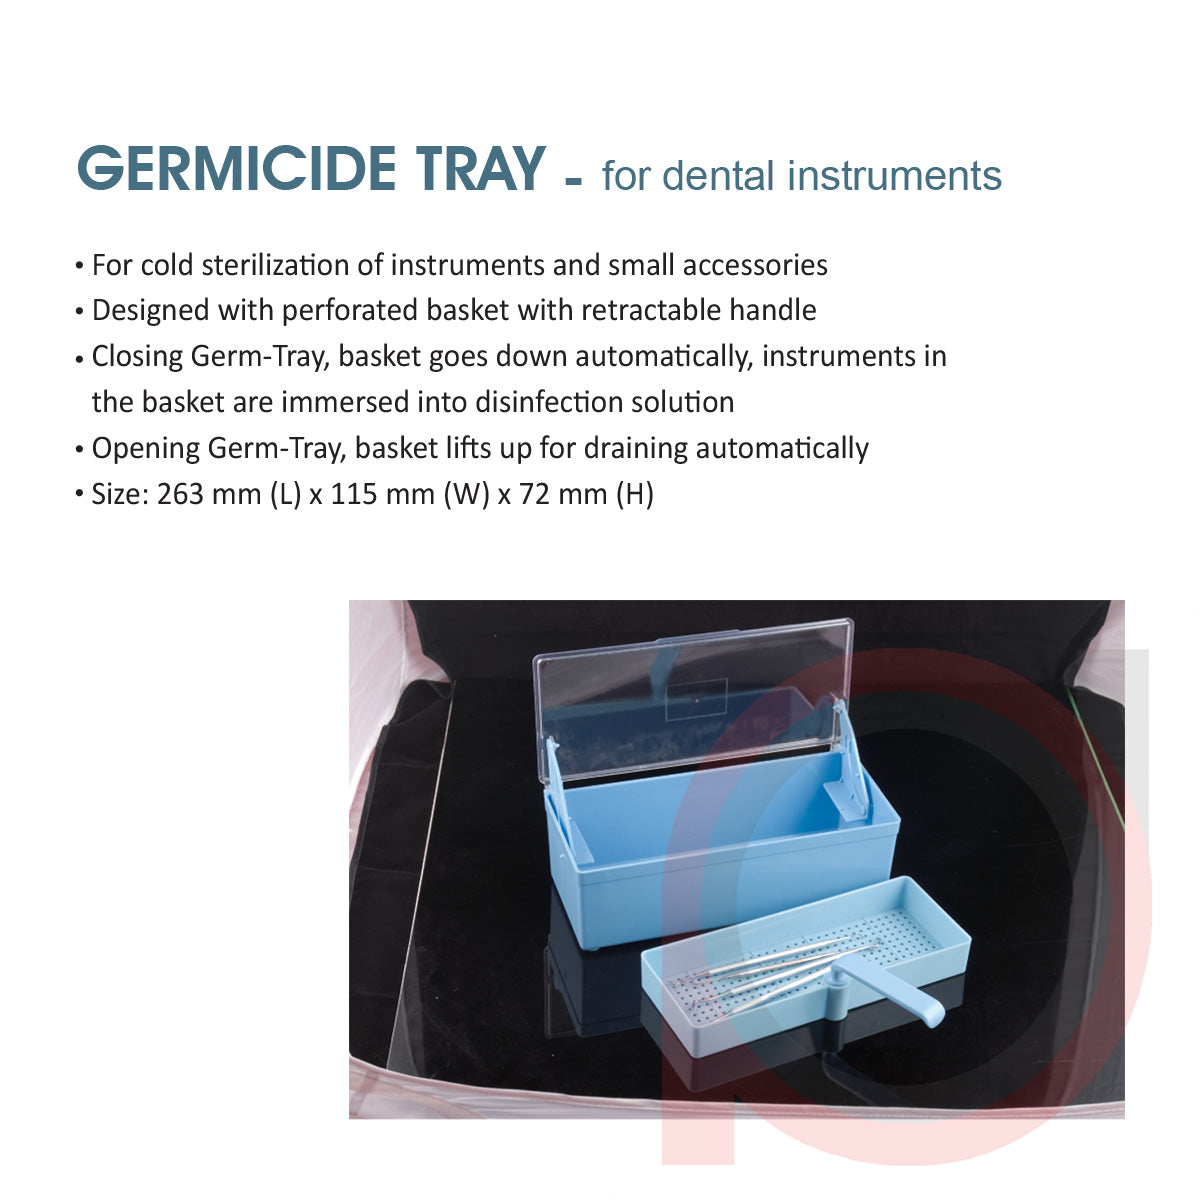 Germicide Tray